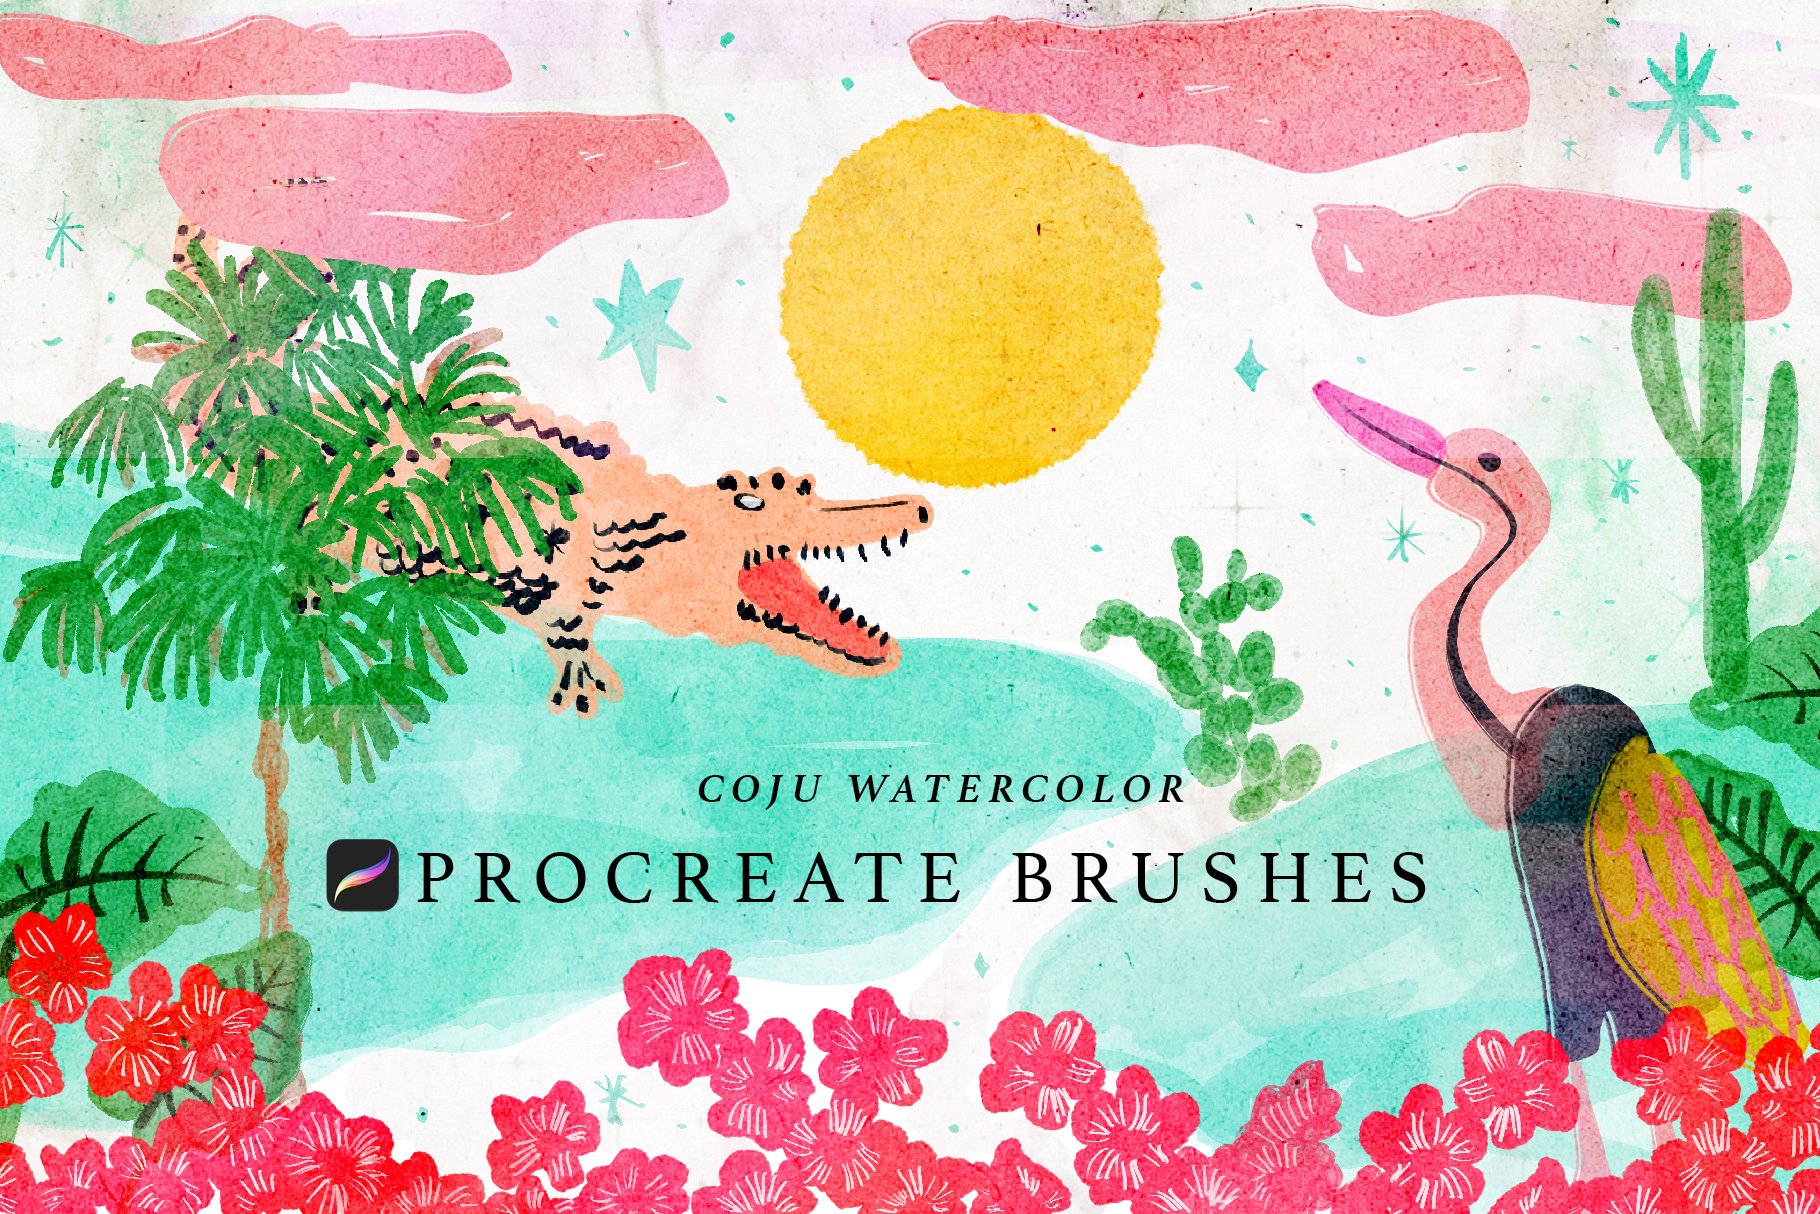 Procreate Summer Watercolor Brushes cover image.